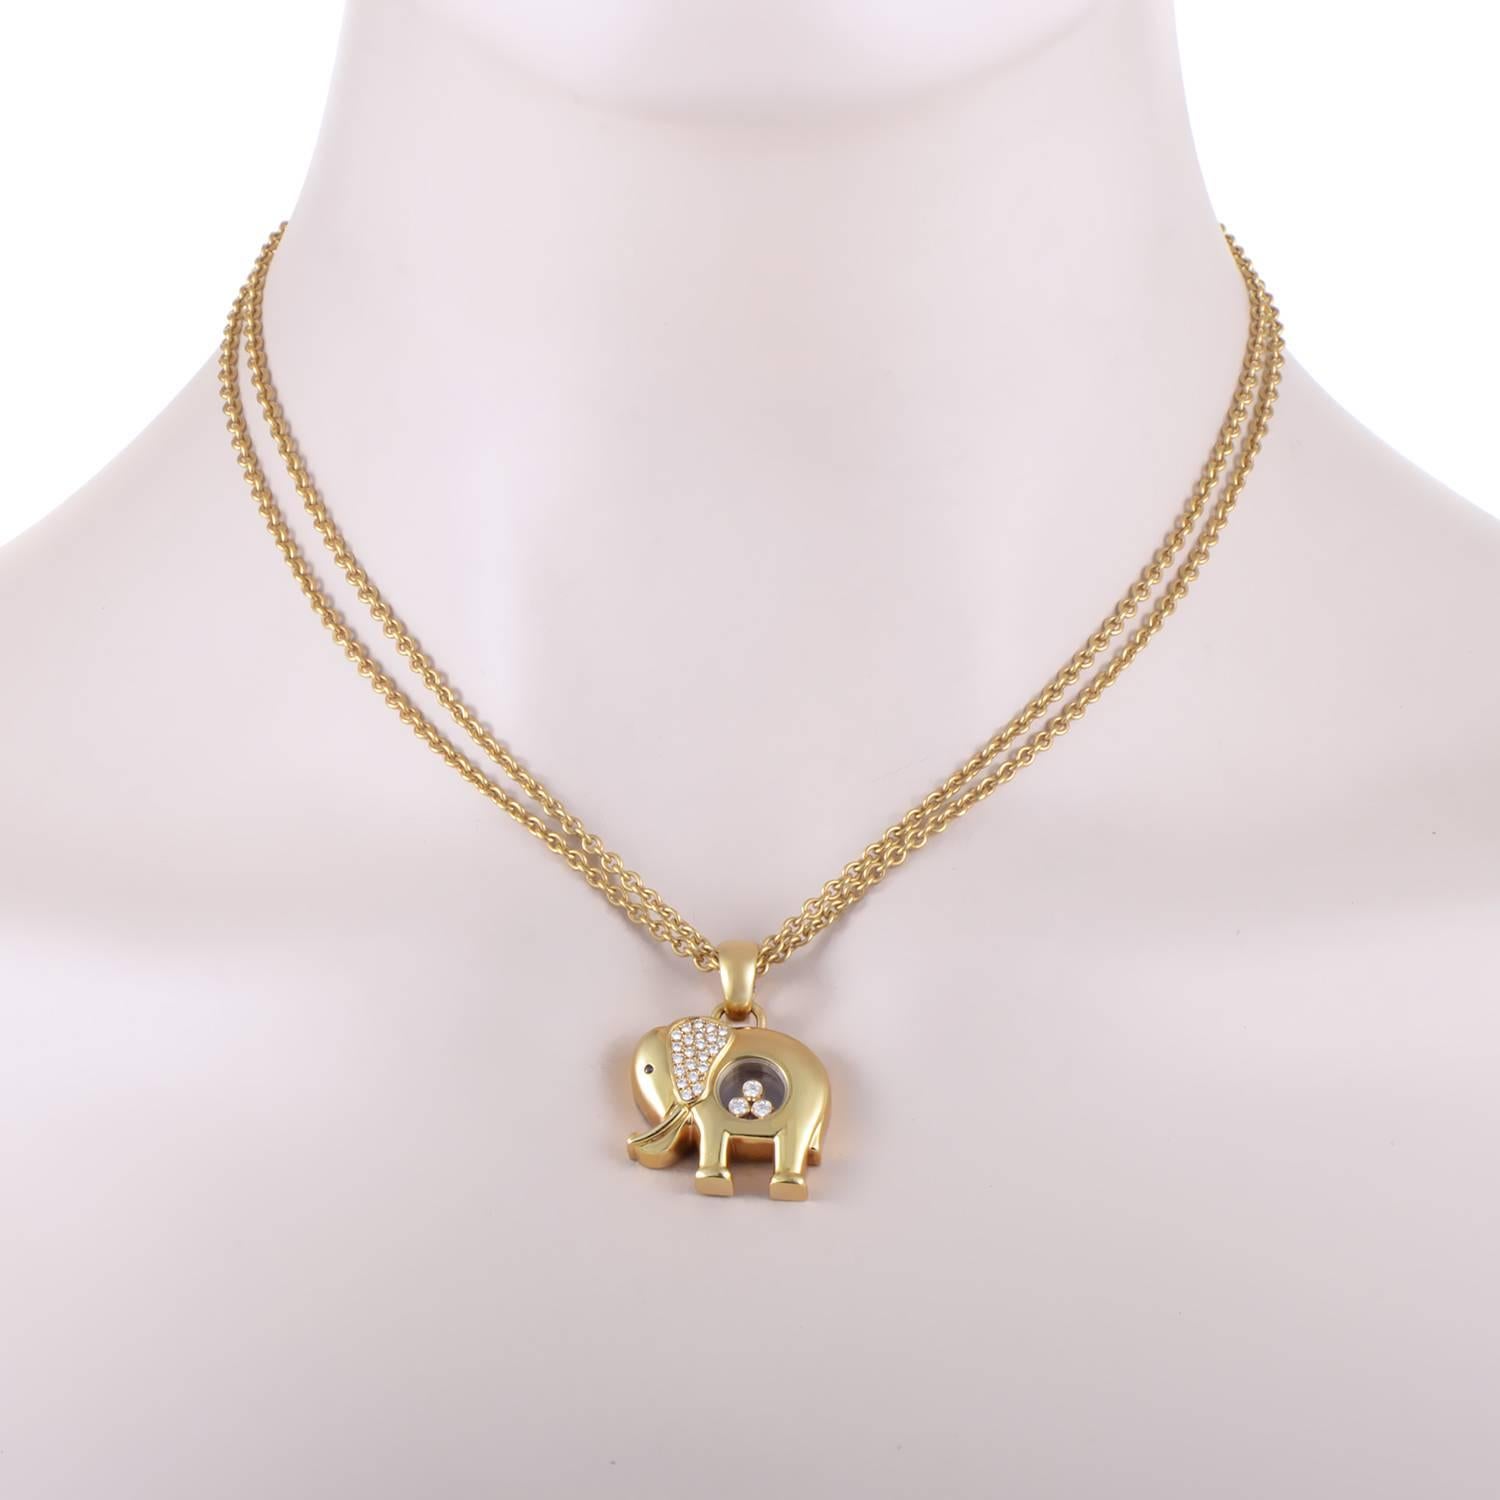 With the instantly recognizable feature of three engaging wandering diamonds and the ever-charming form of an elephant as the pendant, this fantastic necklace from Chopard is made of gleaming 18k yellow gold and embellished with a total of 0.35ct of